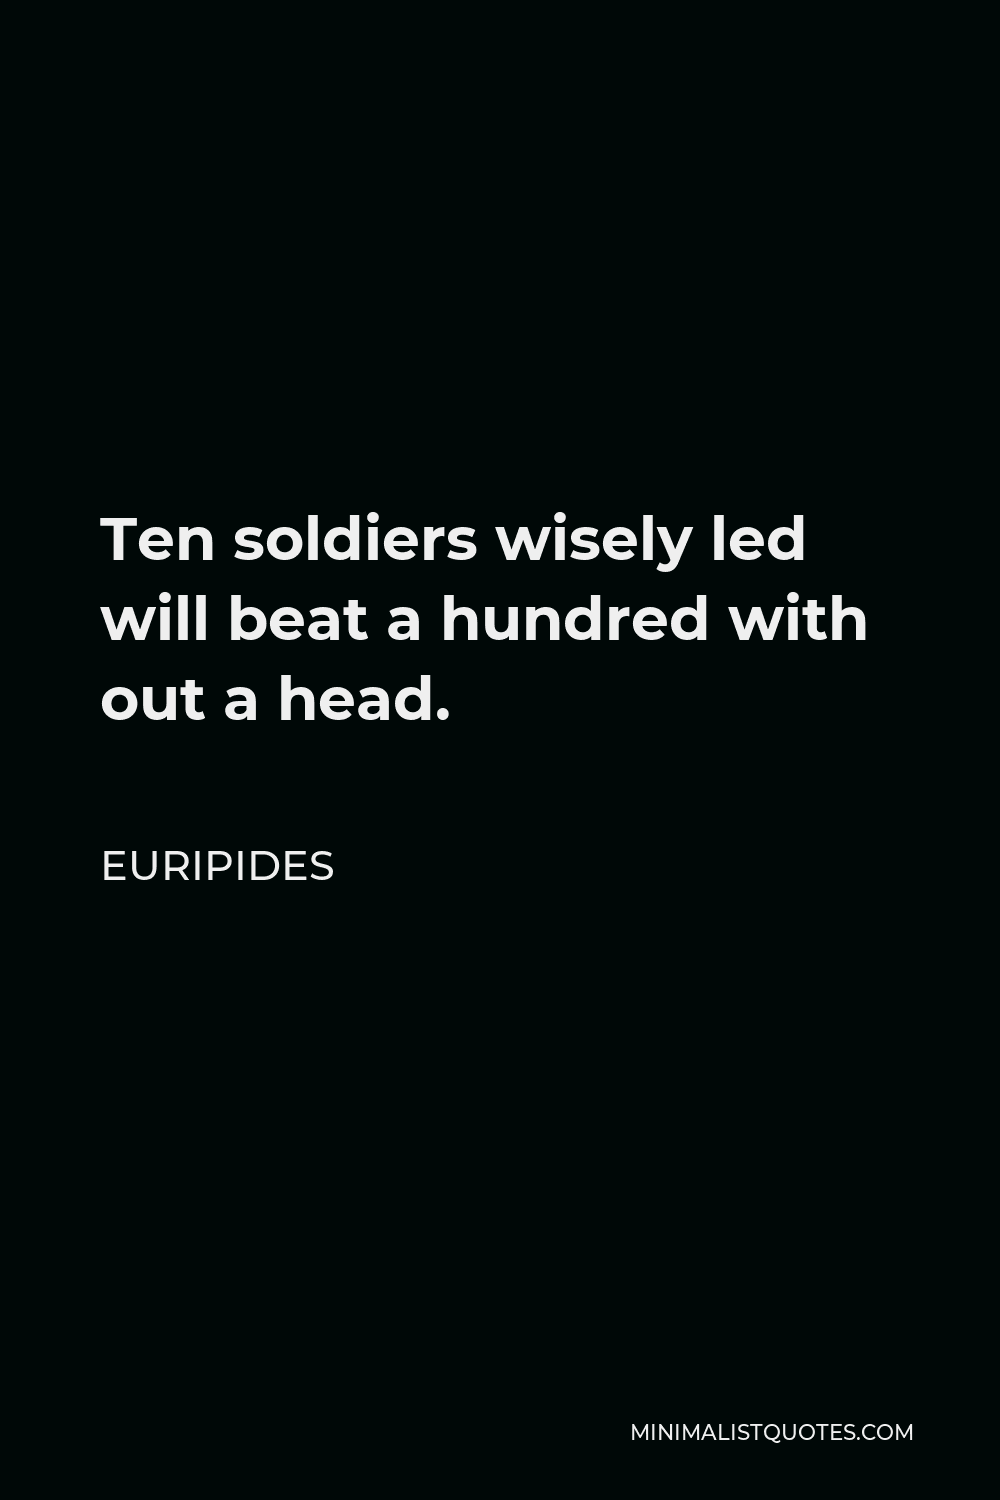 Euripides Quote - Ten soldiers wisely led will beat a hundred with out a head.